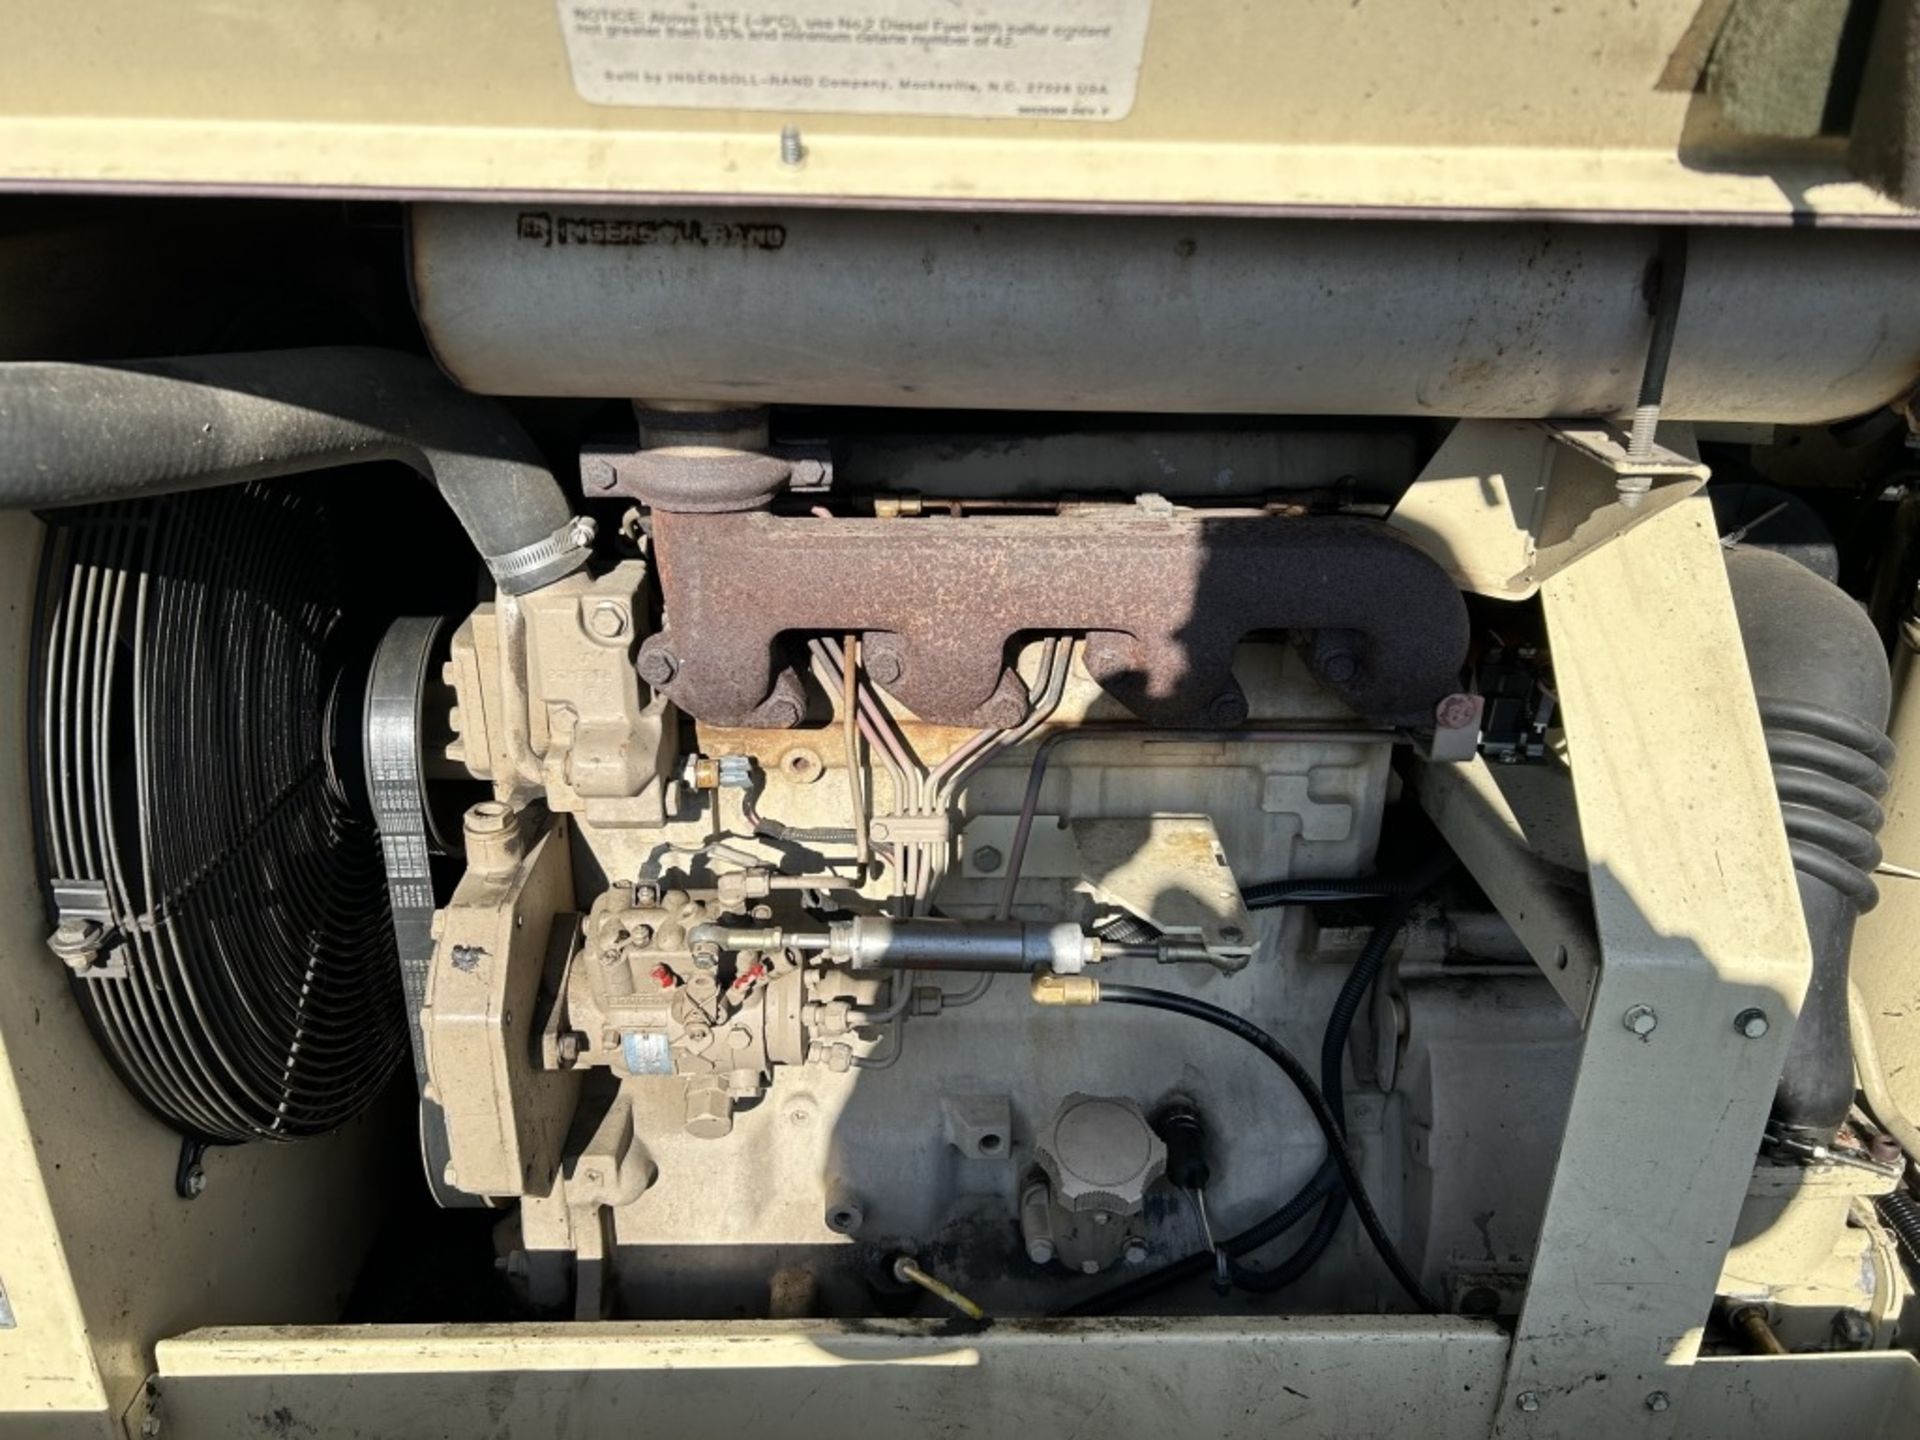 1999 Ingersoll-Rand 185 Towable Air Compressor - Image 16 of 29